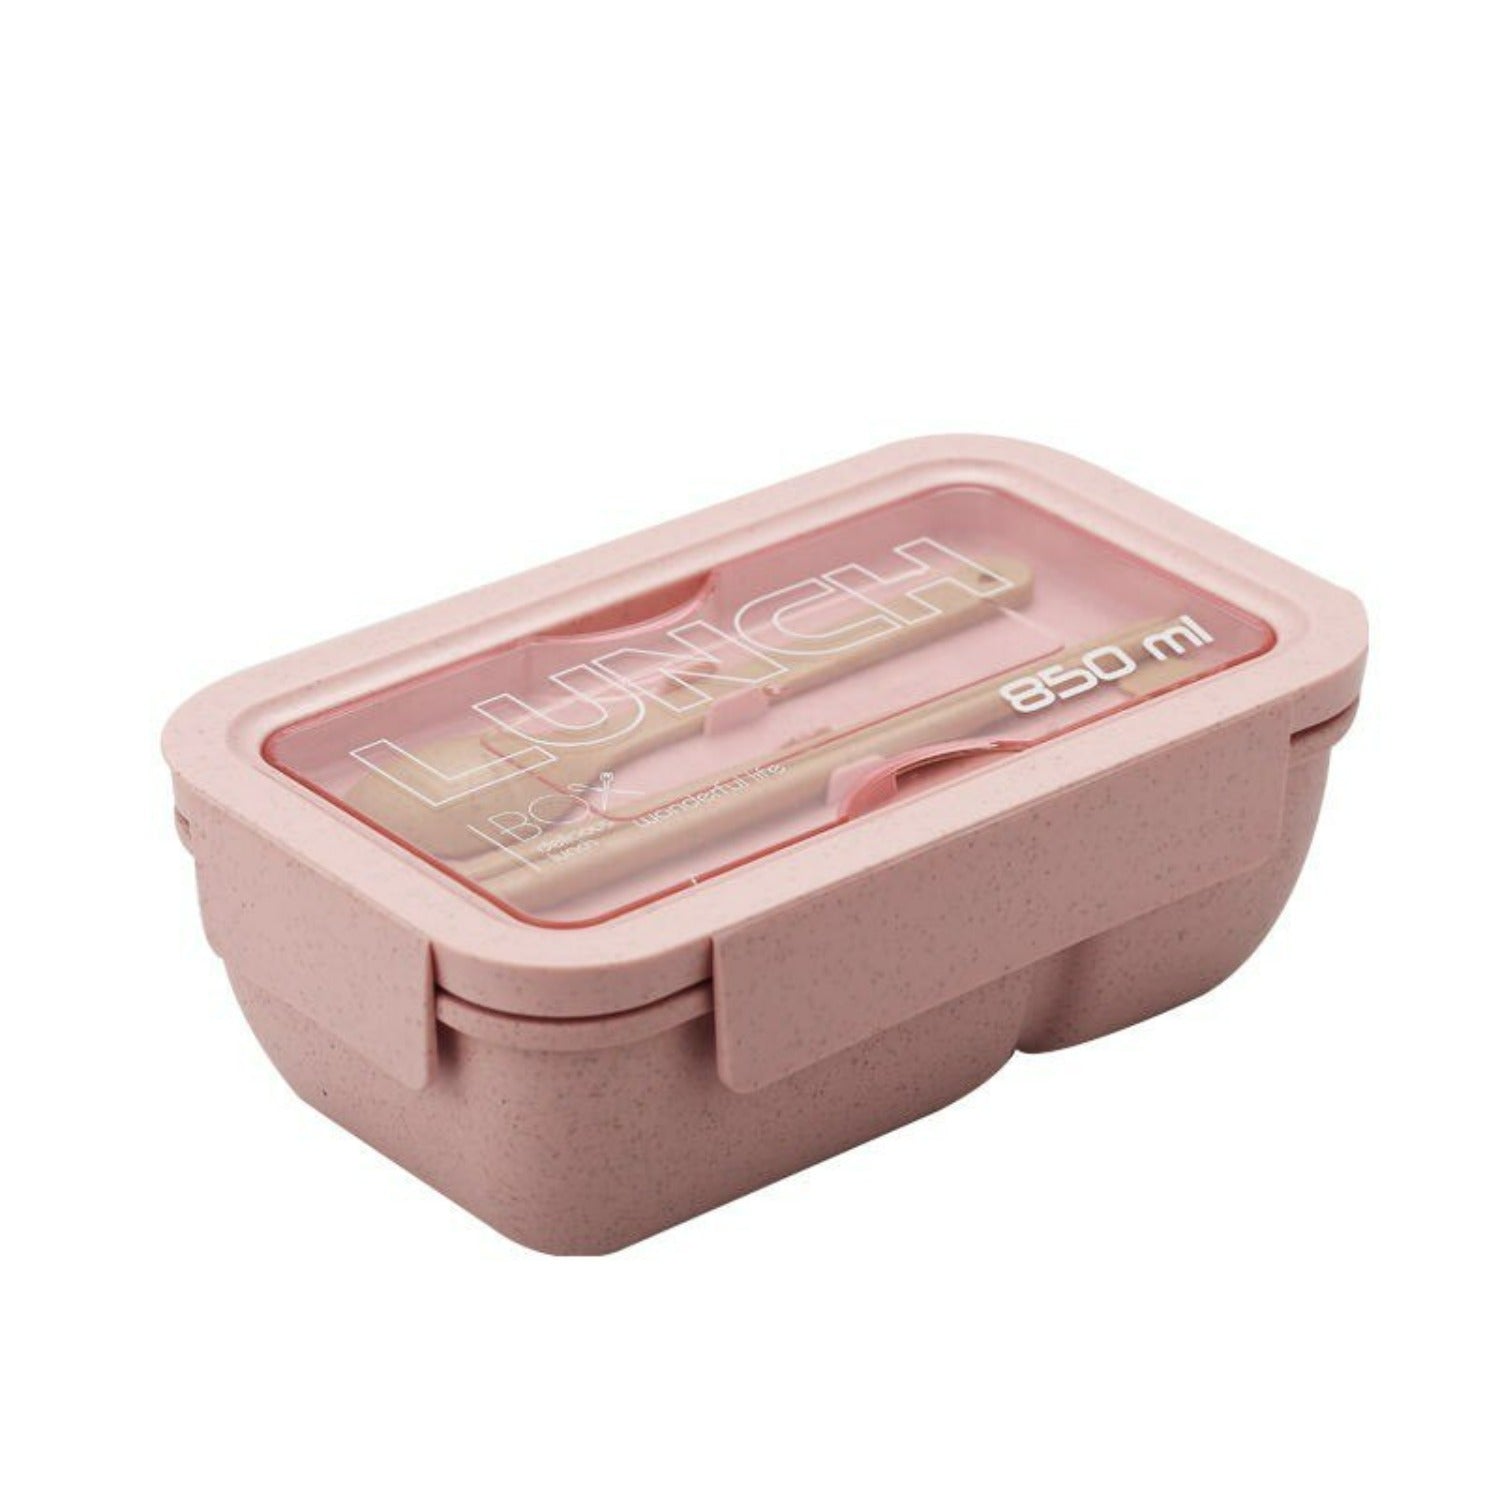 http://allabundantthings.com/cdn/shop/files/BJ3d850ml-Wheat-Straw-Lunch-Box-Healthy-Material-Bento-Boxes-Microwave-Dinnerware-Food-Storage-Container-Lunchbox.jpg?v=1684907992